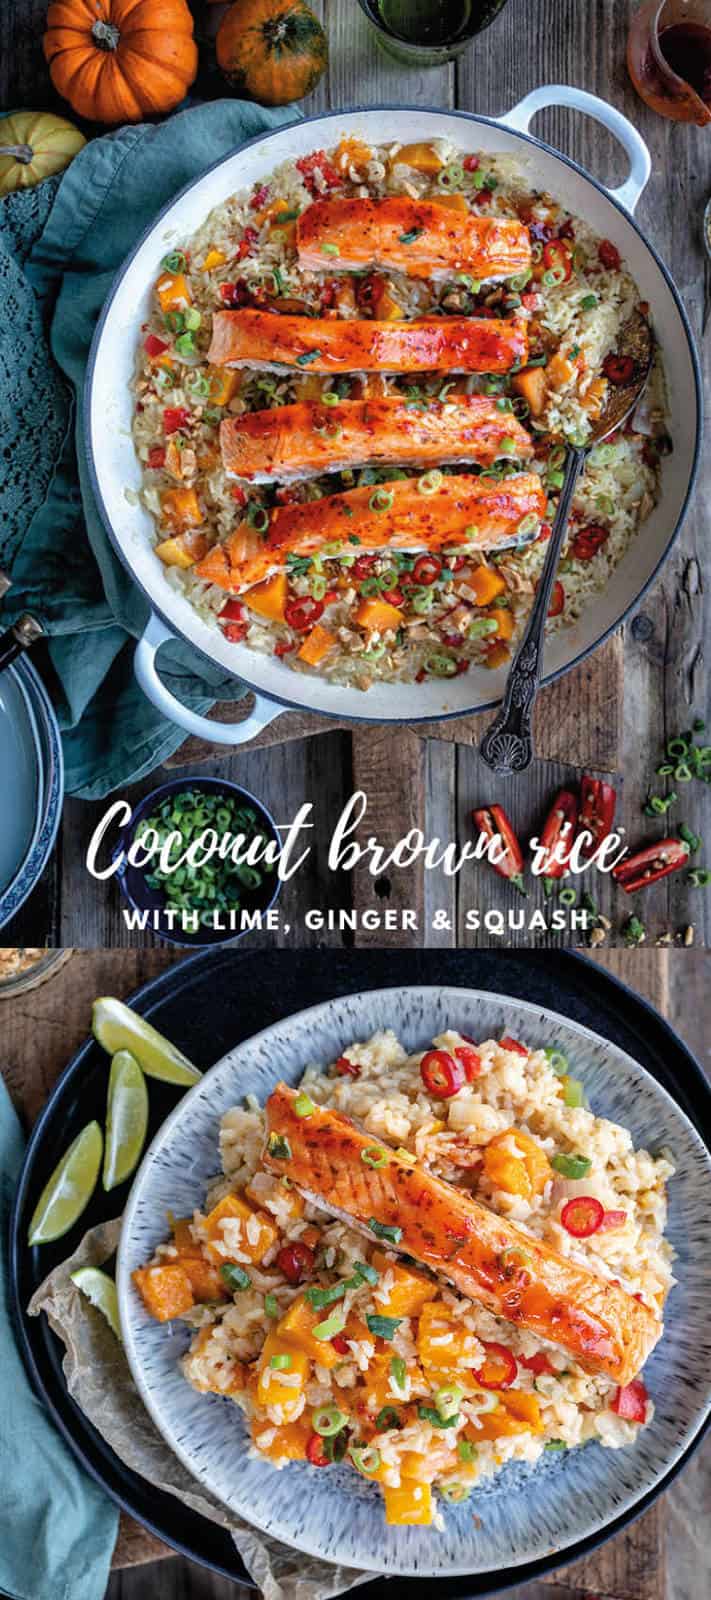 delicious coconut brown rice with ginger, lime and squash is the perfect pairing for The Saucy Fish Co. Salmon with chilli, lime and ginger dressing